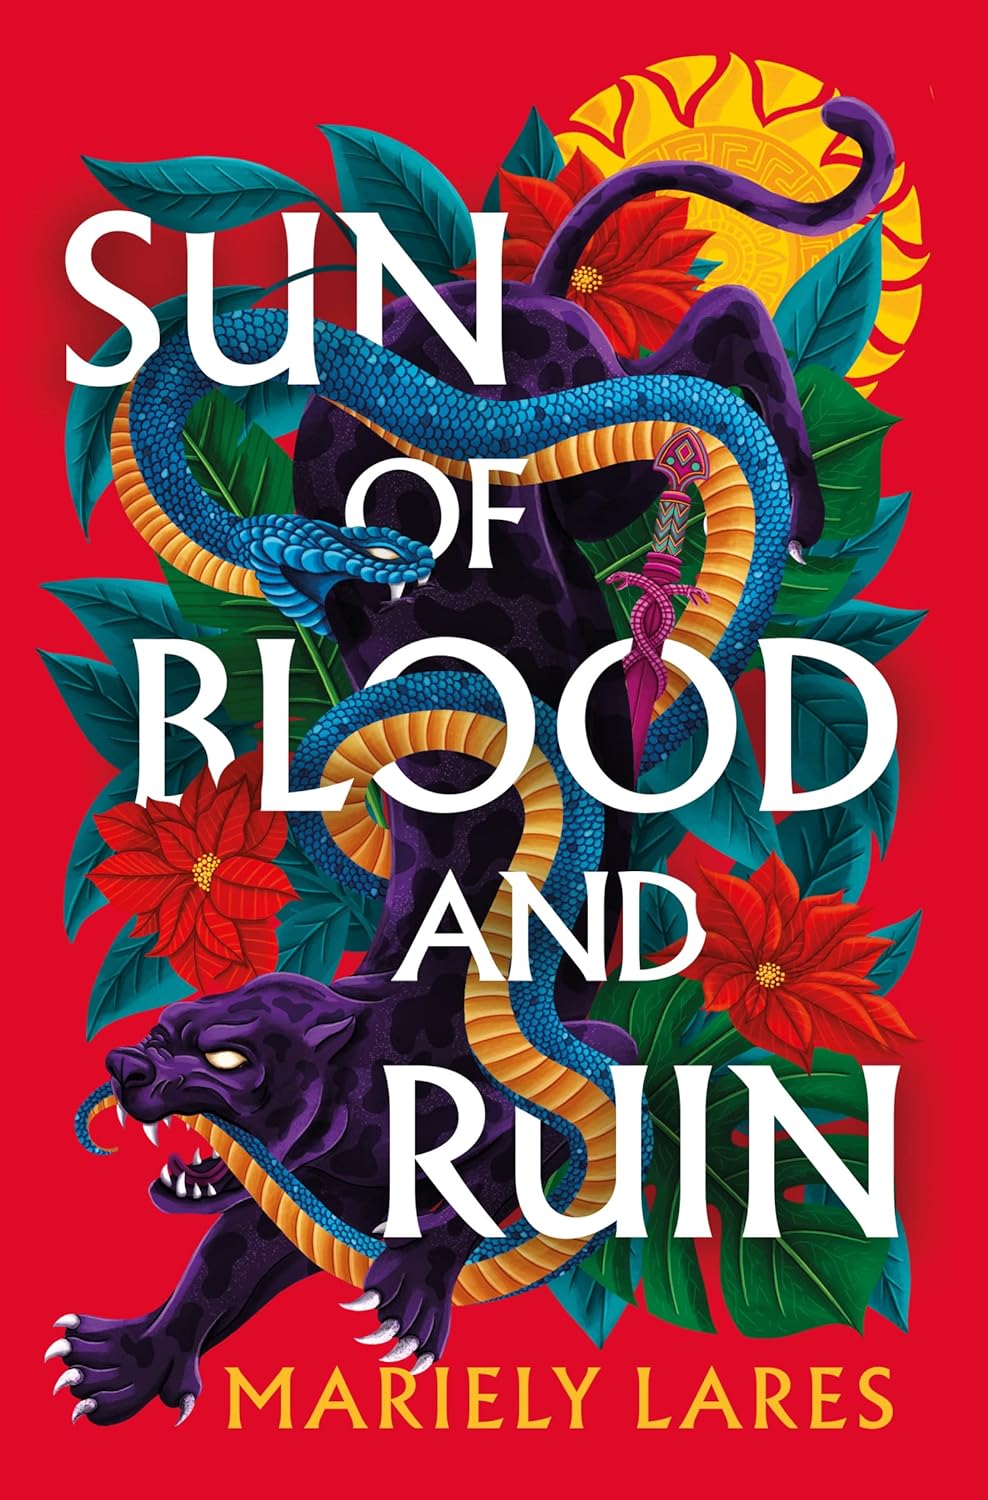 Image for "Sun of Blood and Ruin"